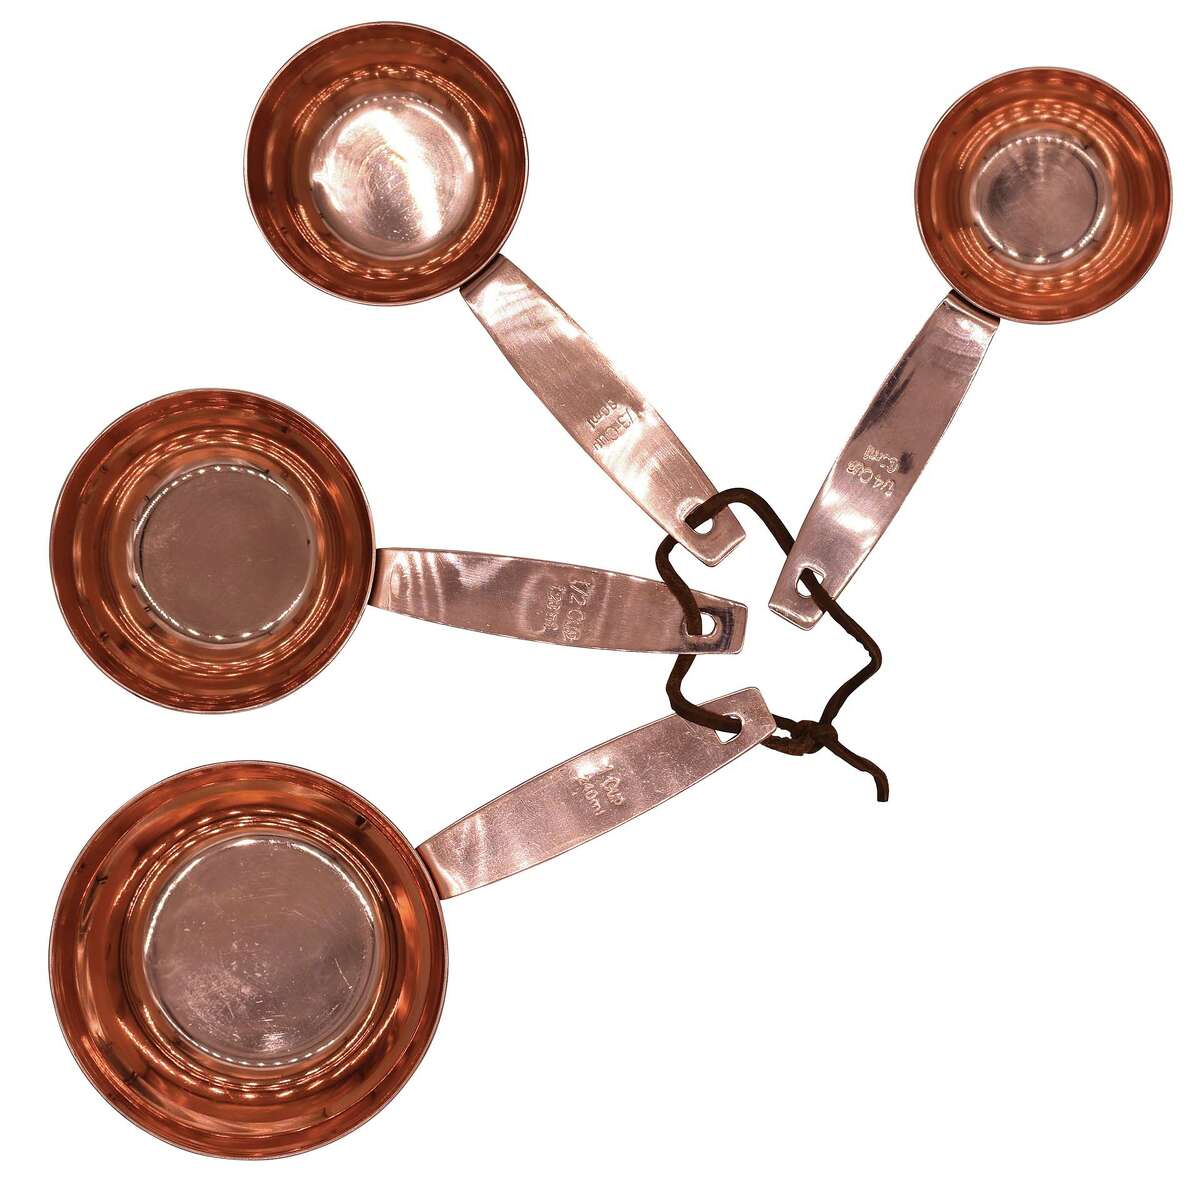 Copper measuring cups from Creative Co-Op, available at CP Farmhouse in Litchfield